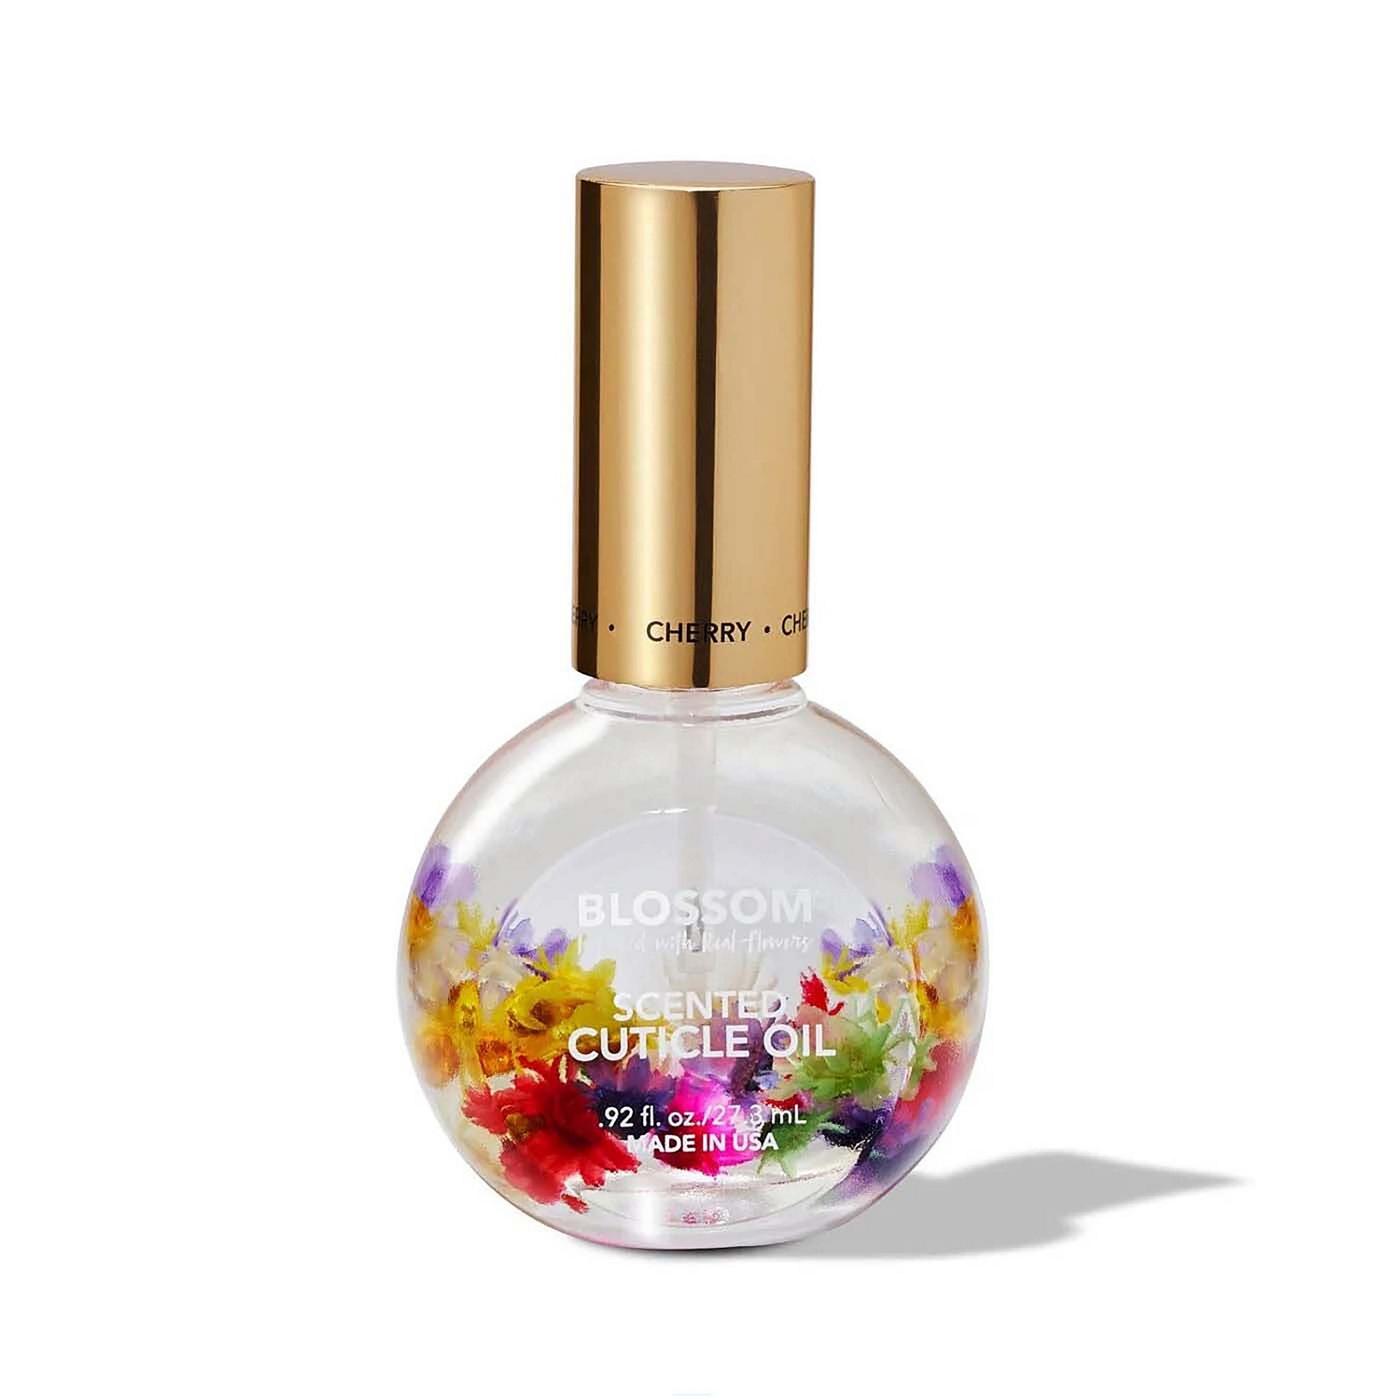 Blossom Cuticle Oil - Cherry; image 1 of 3